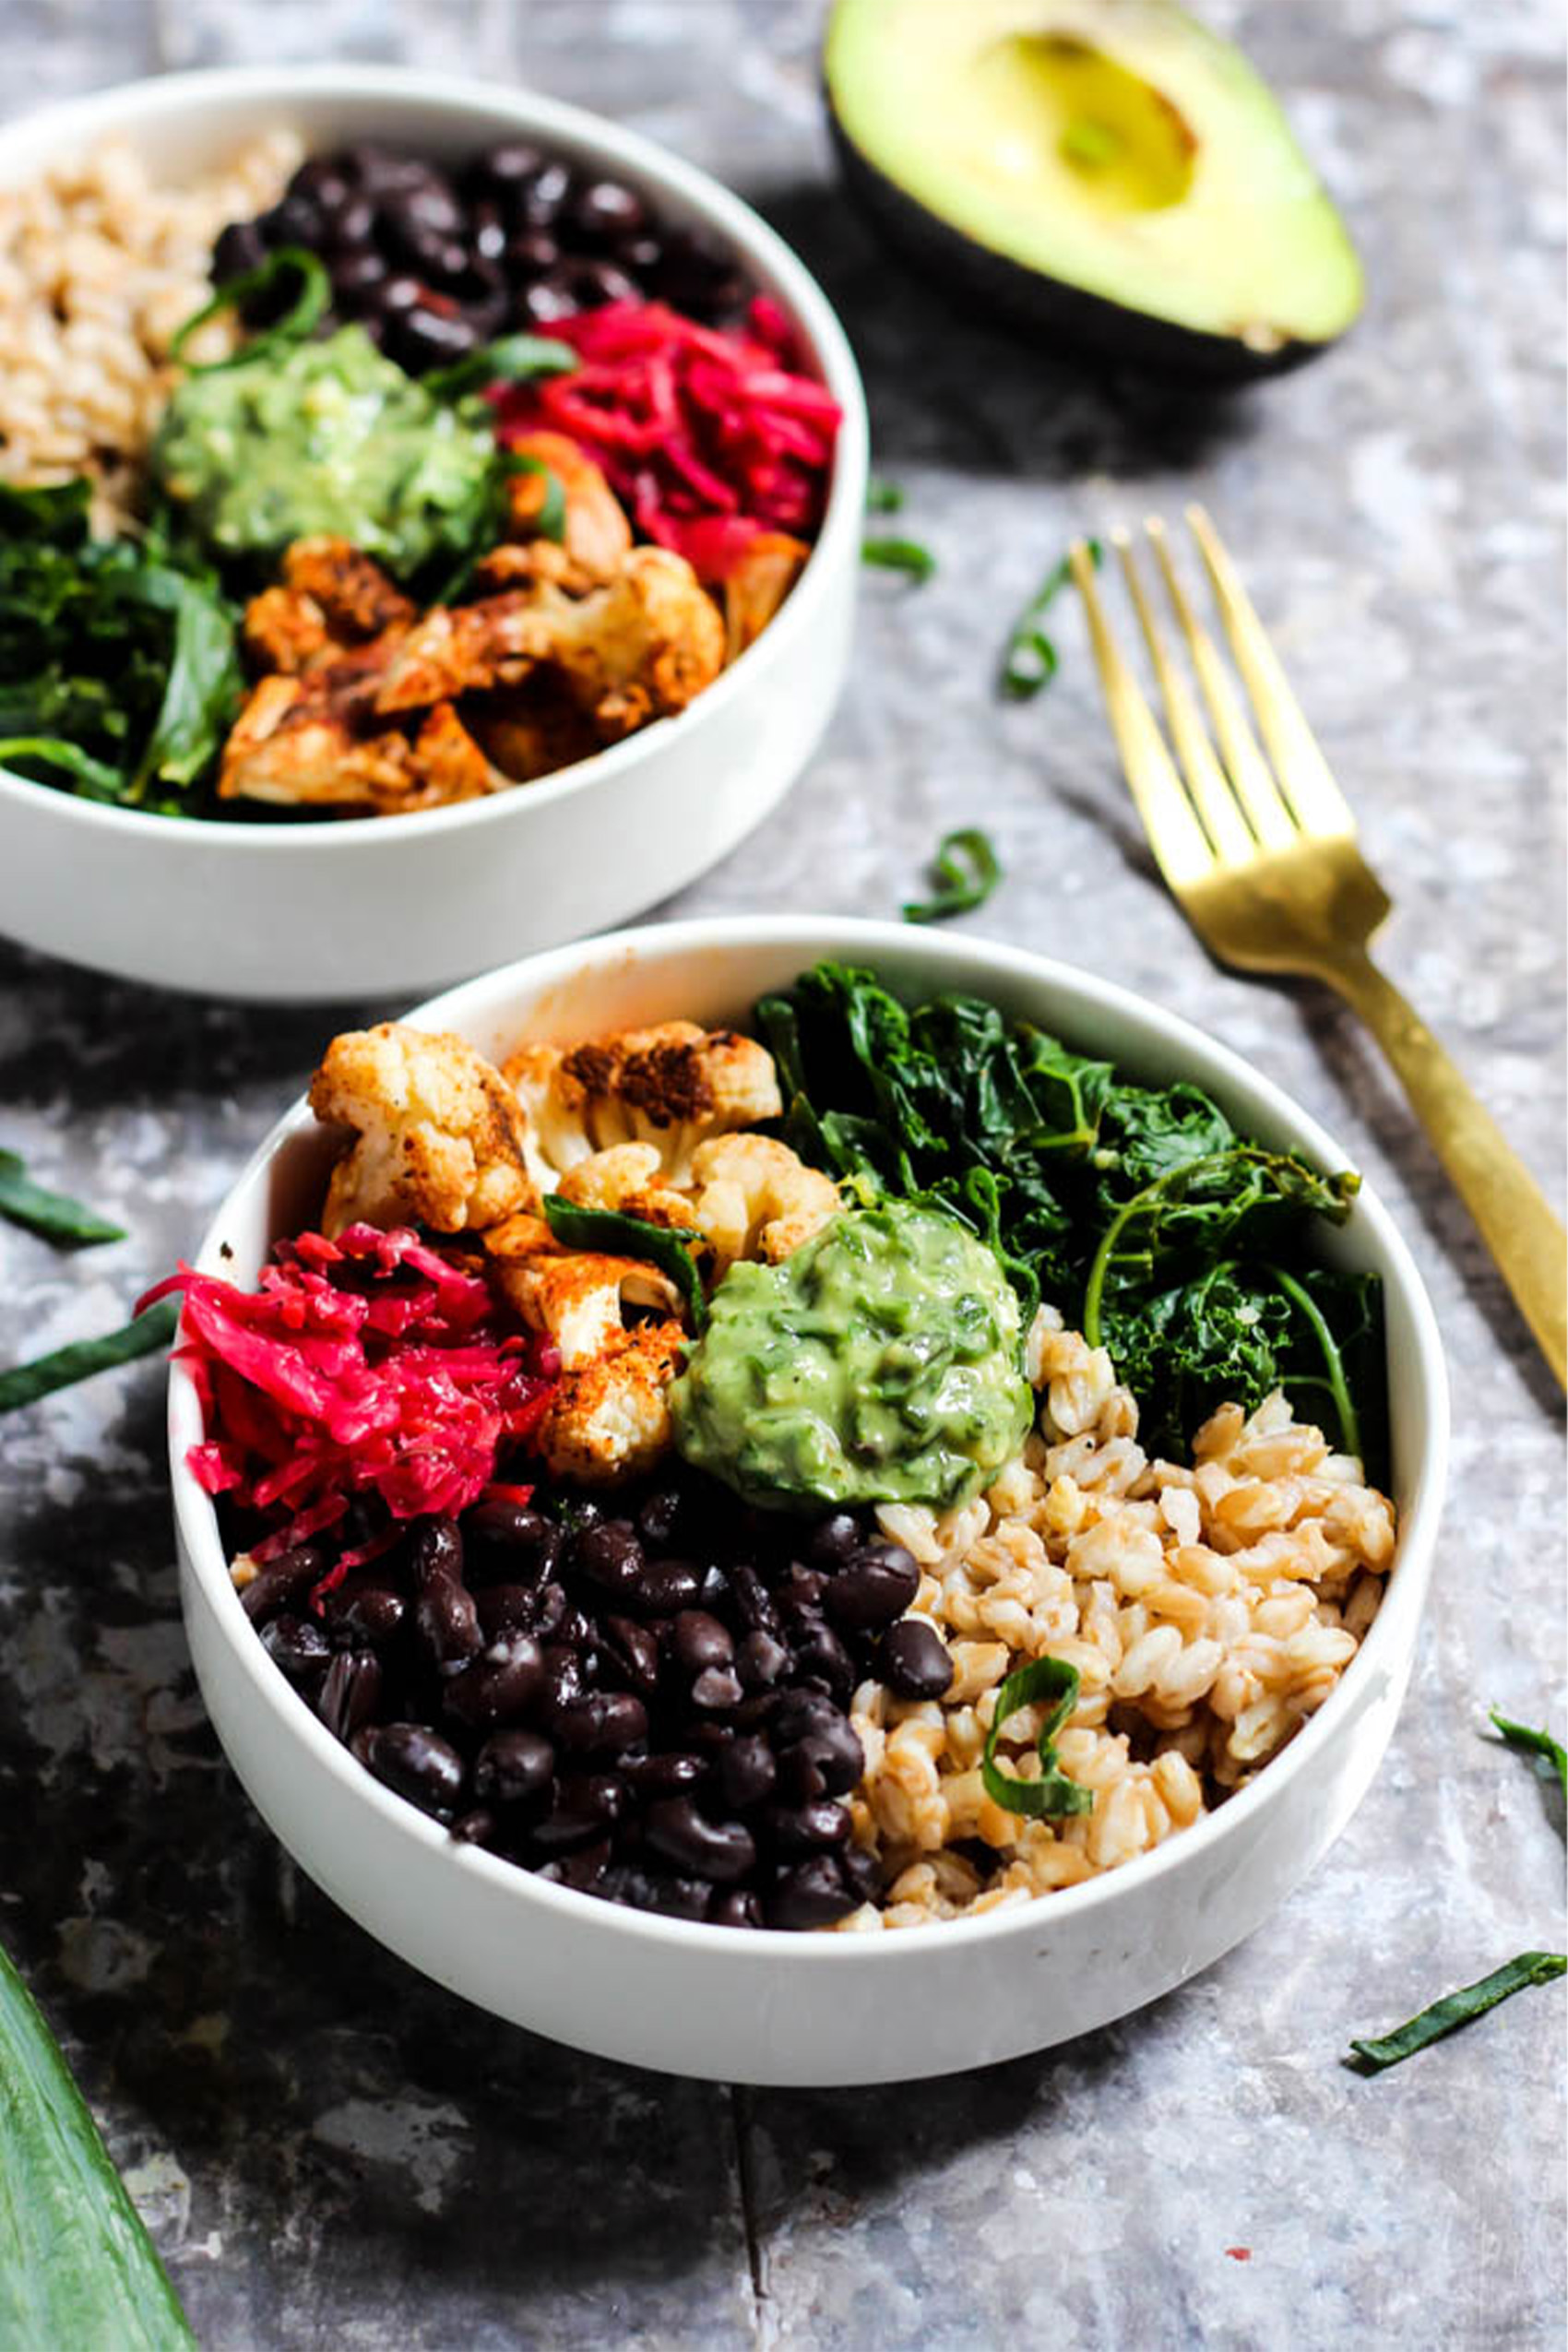 two power bowls filled with grains, black beans, greens and cauliflower